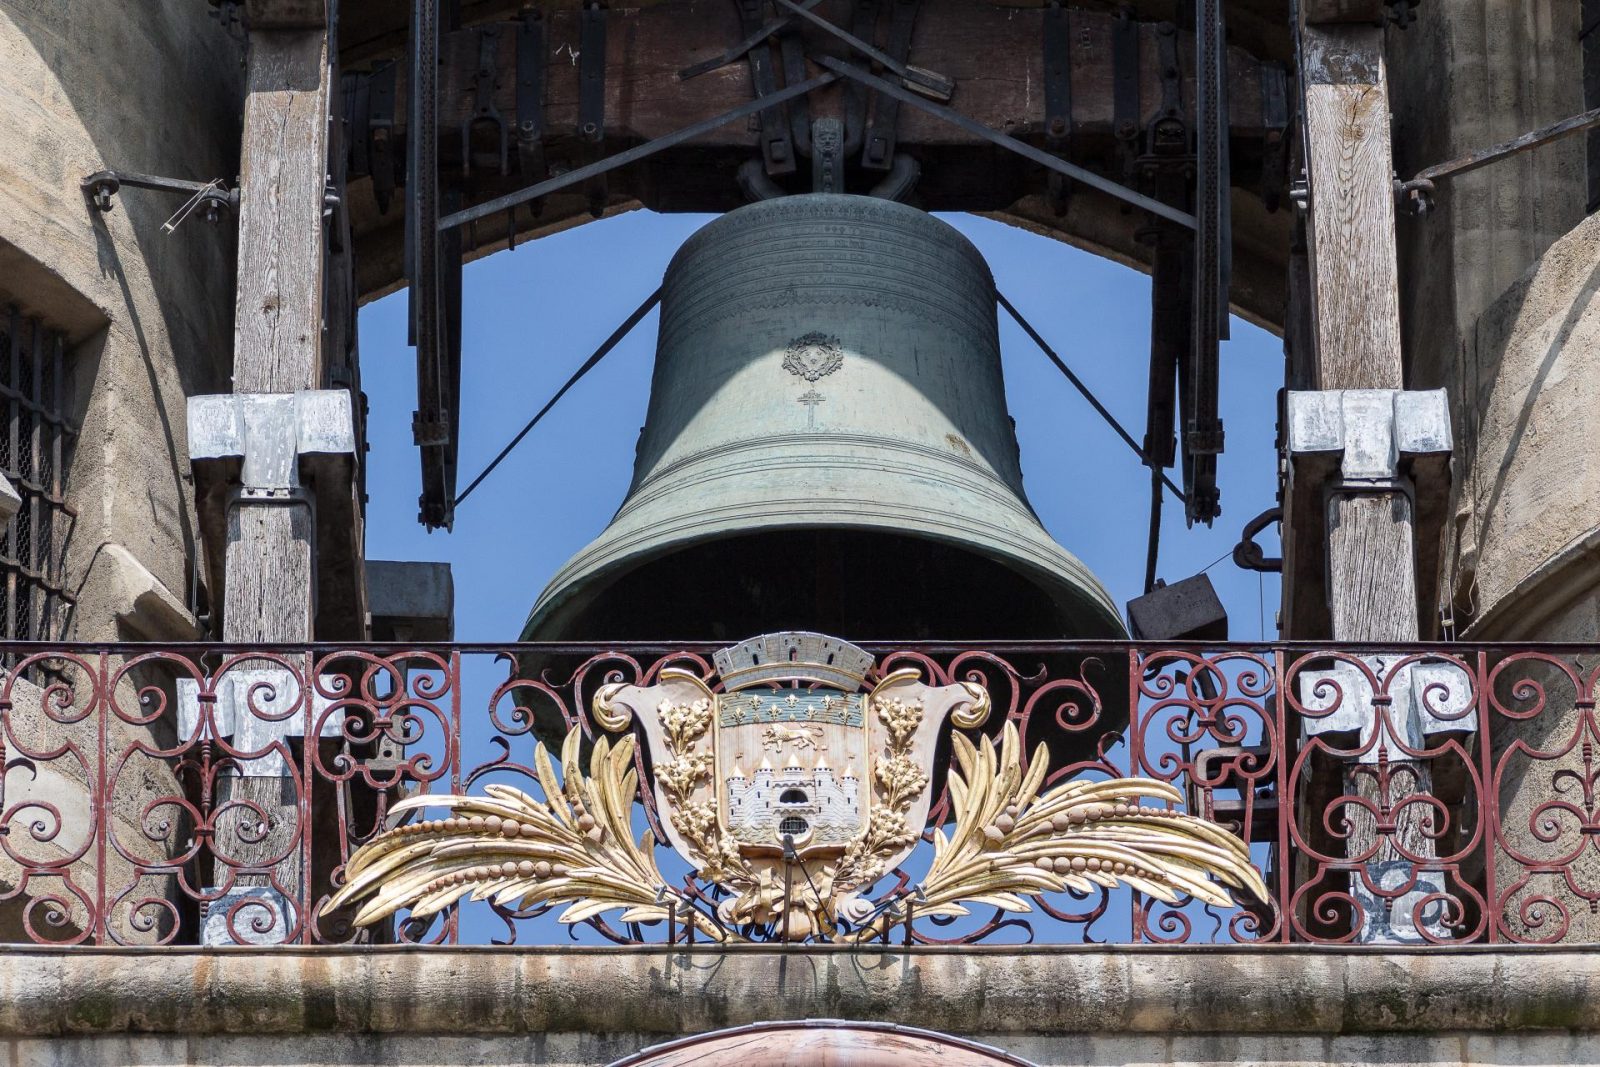 Big Bell in BORDEAUX - Cultural heritage - Gironde Tourism